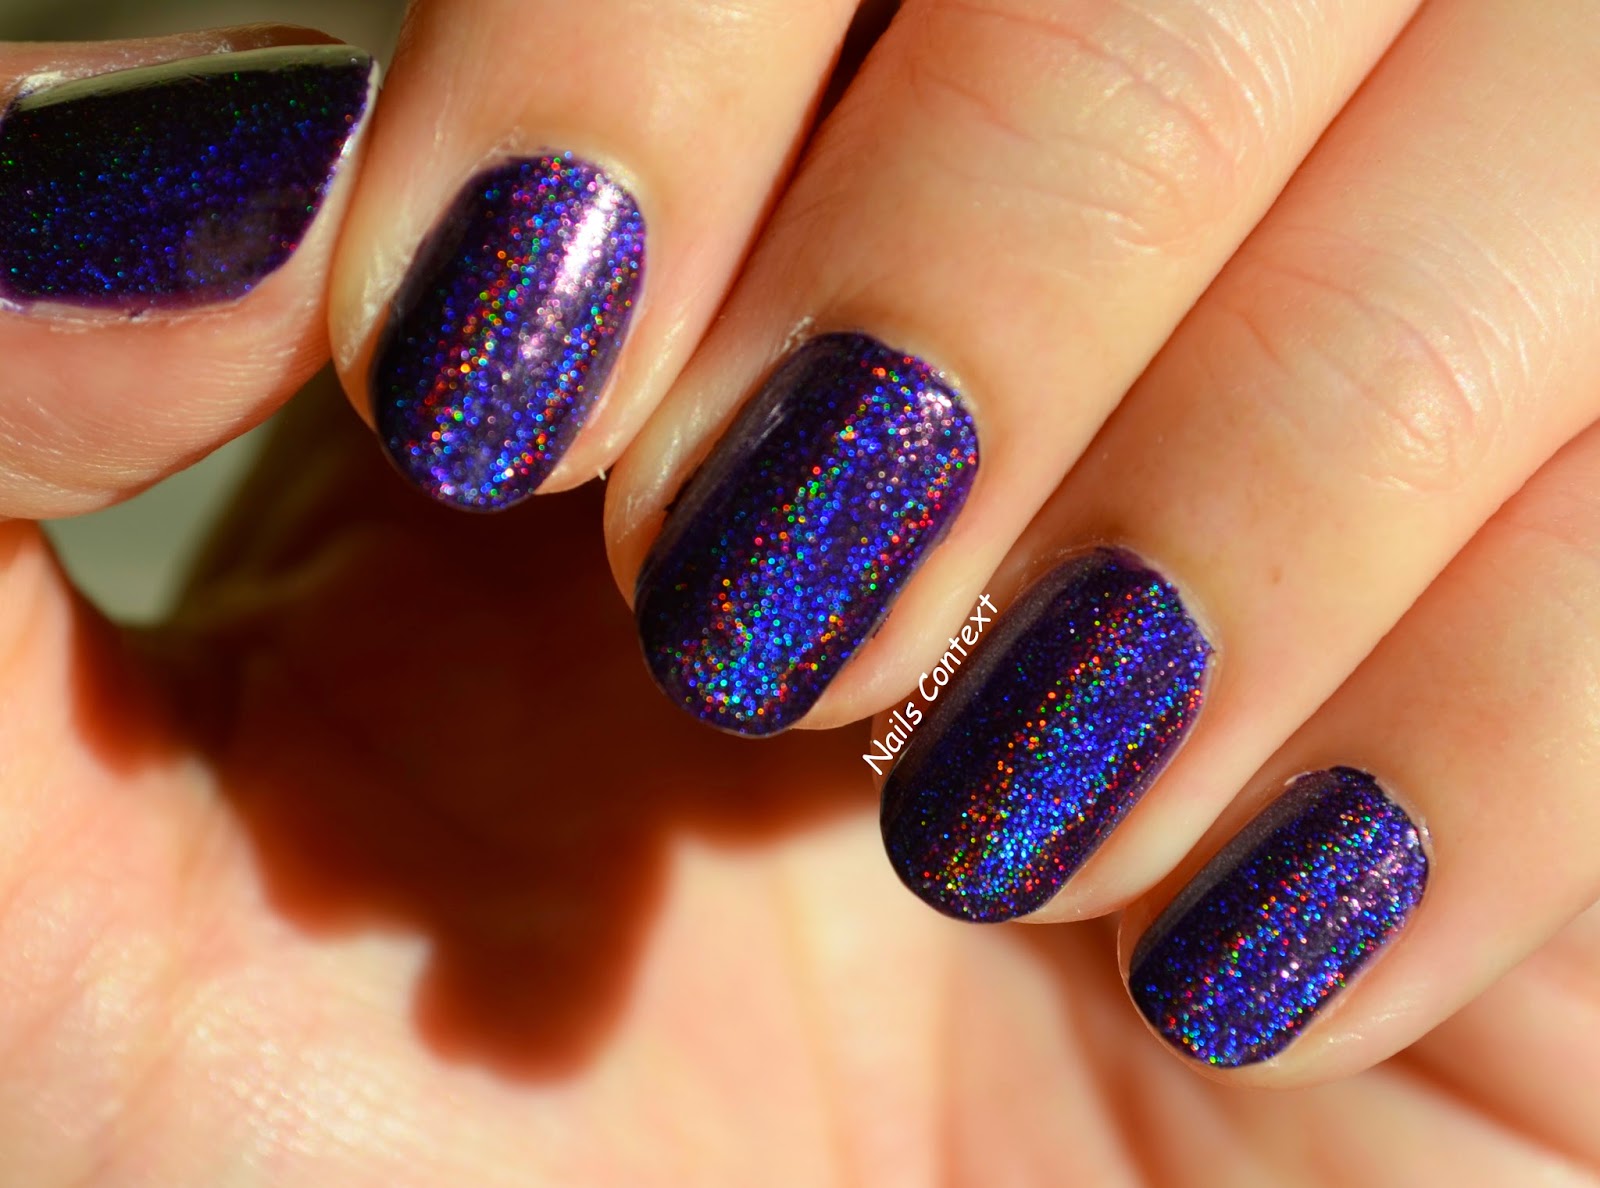 Fun Lacquer Nail Polish in "Color Me Fabulous" - wide 6